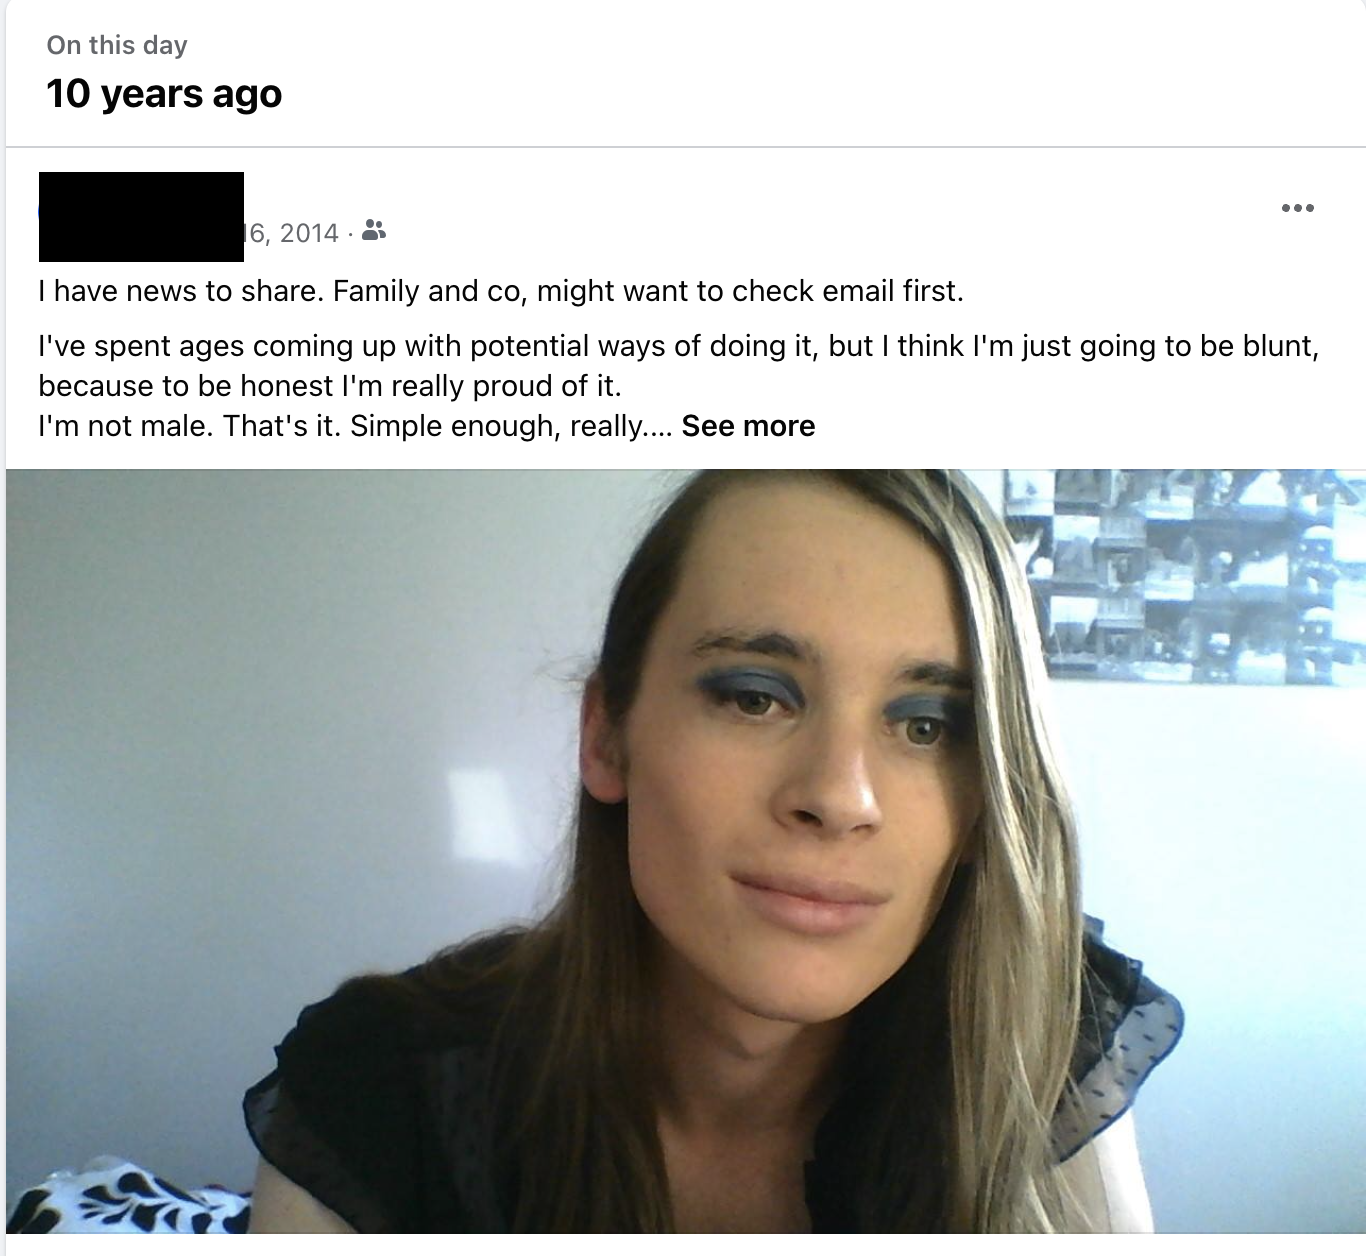 A screenshot of my coming out post on Facebook, with a photo taken that day. I'm wearing blue eyeshadow with long hair. The snippet of the post reads: I have news to share. Family and co, might want to check email first. I've spent ages coming up with potential ways of doing it, but I think I'm just going to be blunt, because to be honest I'm really proud of it. I'm not male. That's it. Simple enough, really. …